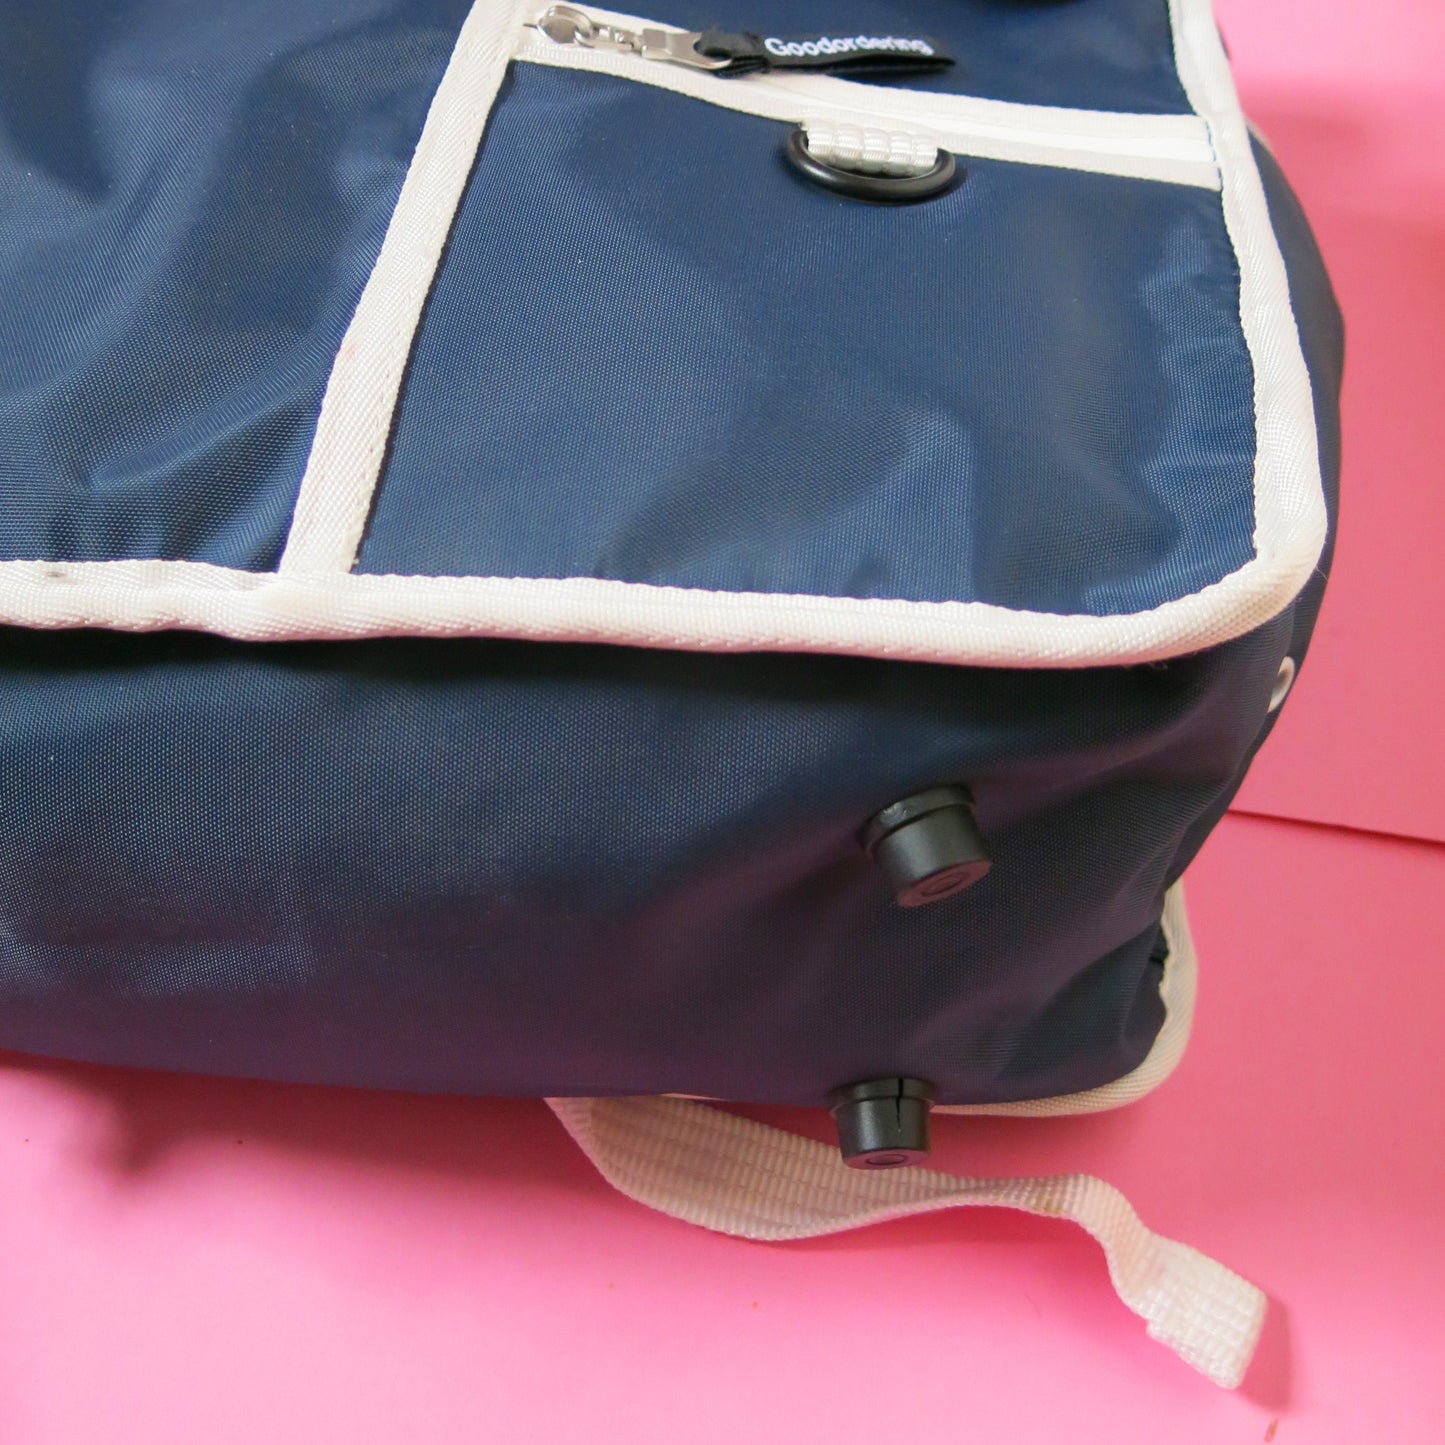 Rolltop backpack Pannier Eco Navy Blue White